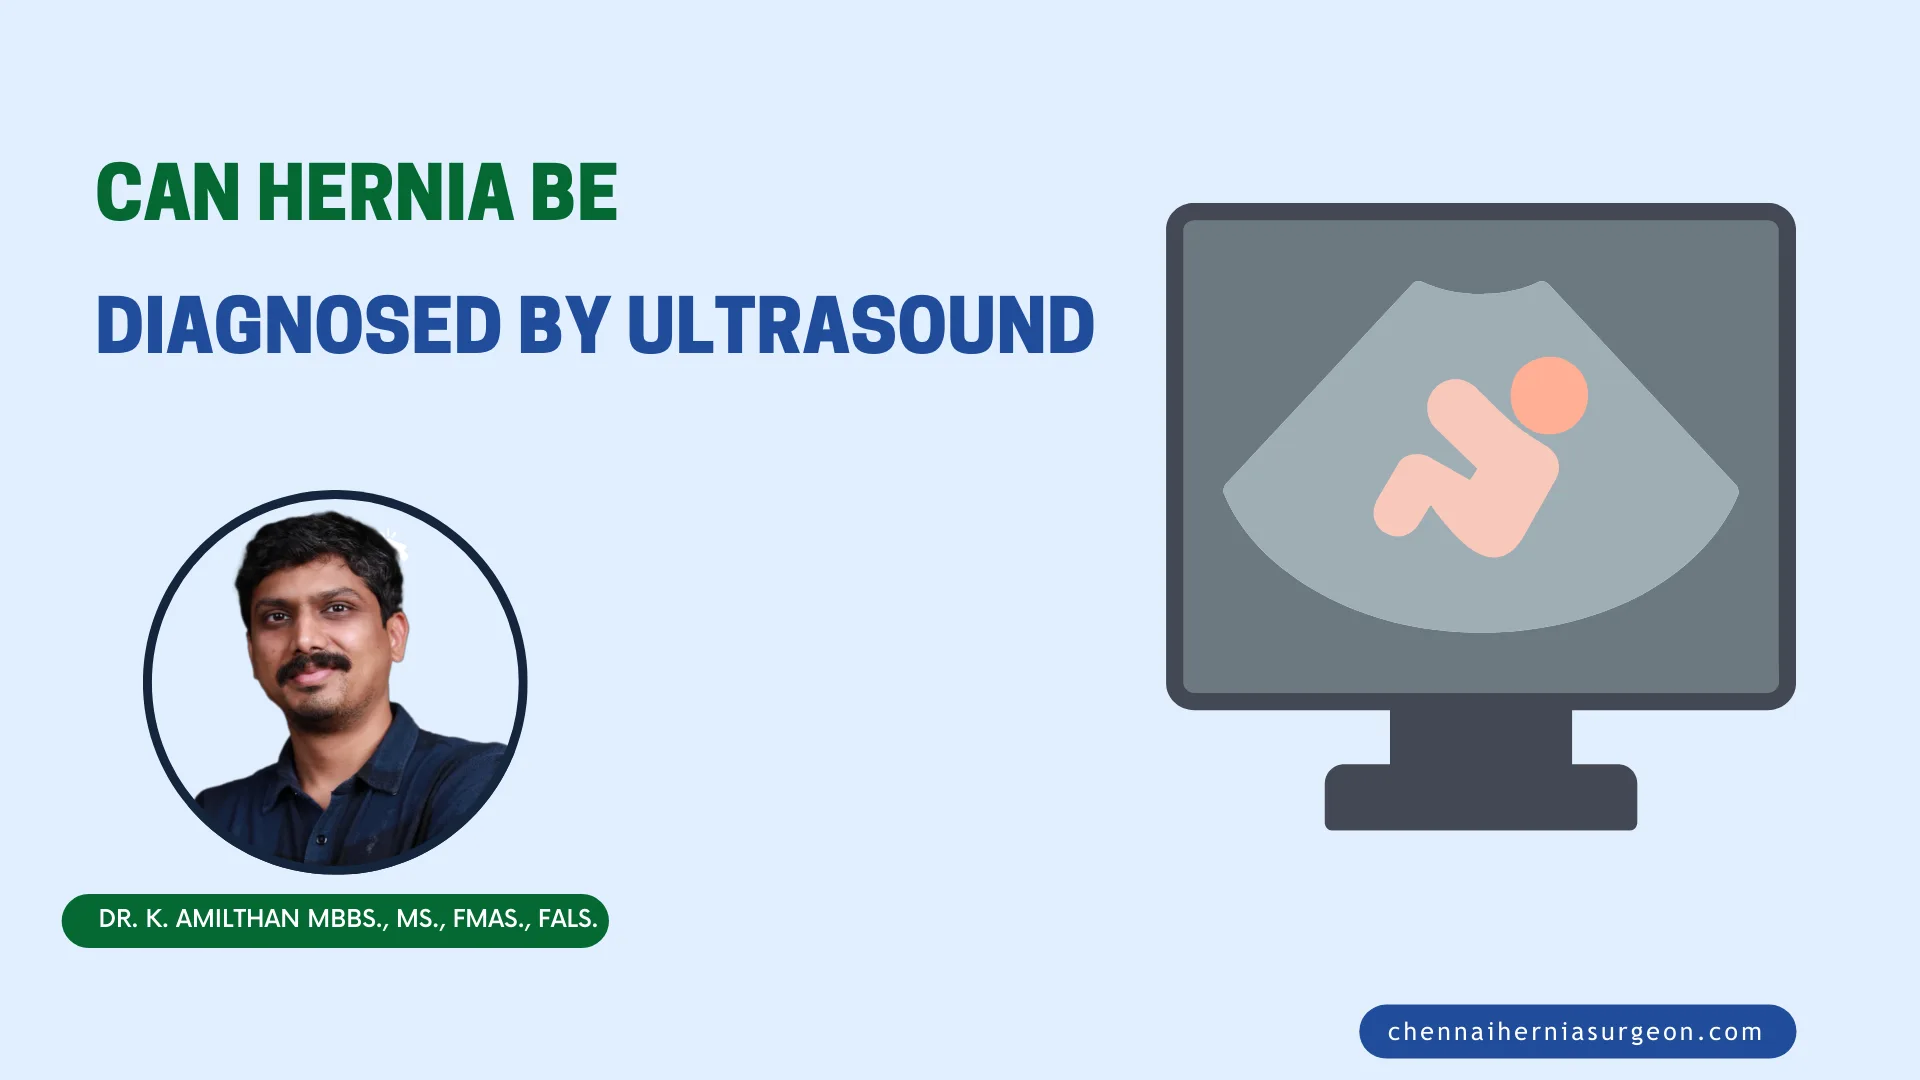 Can Hernia be Diagnosed by Ultrasound